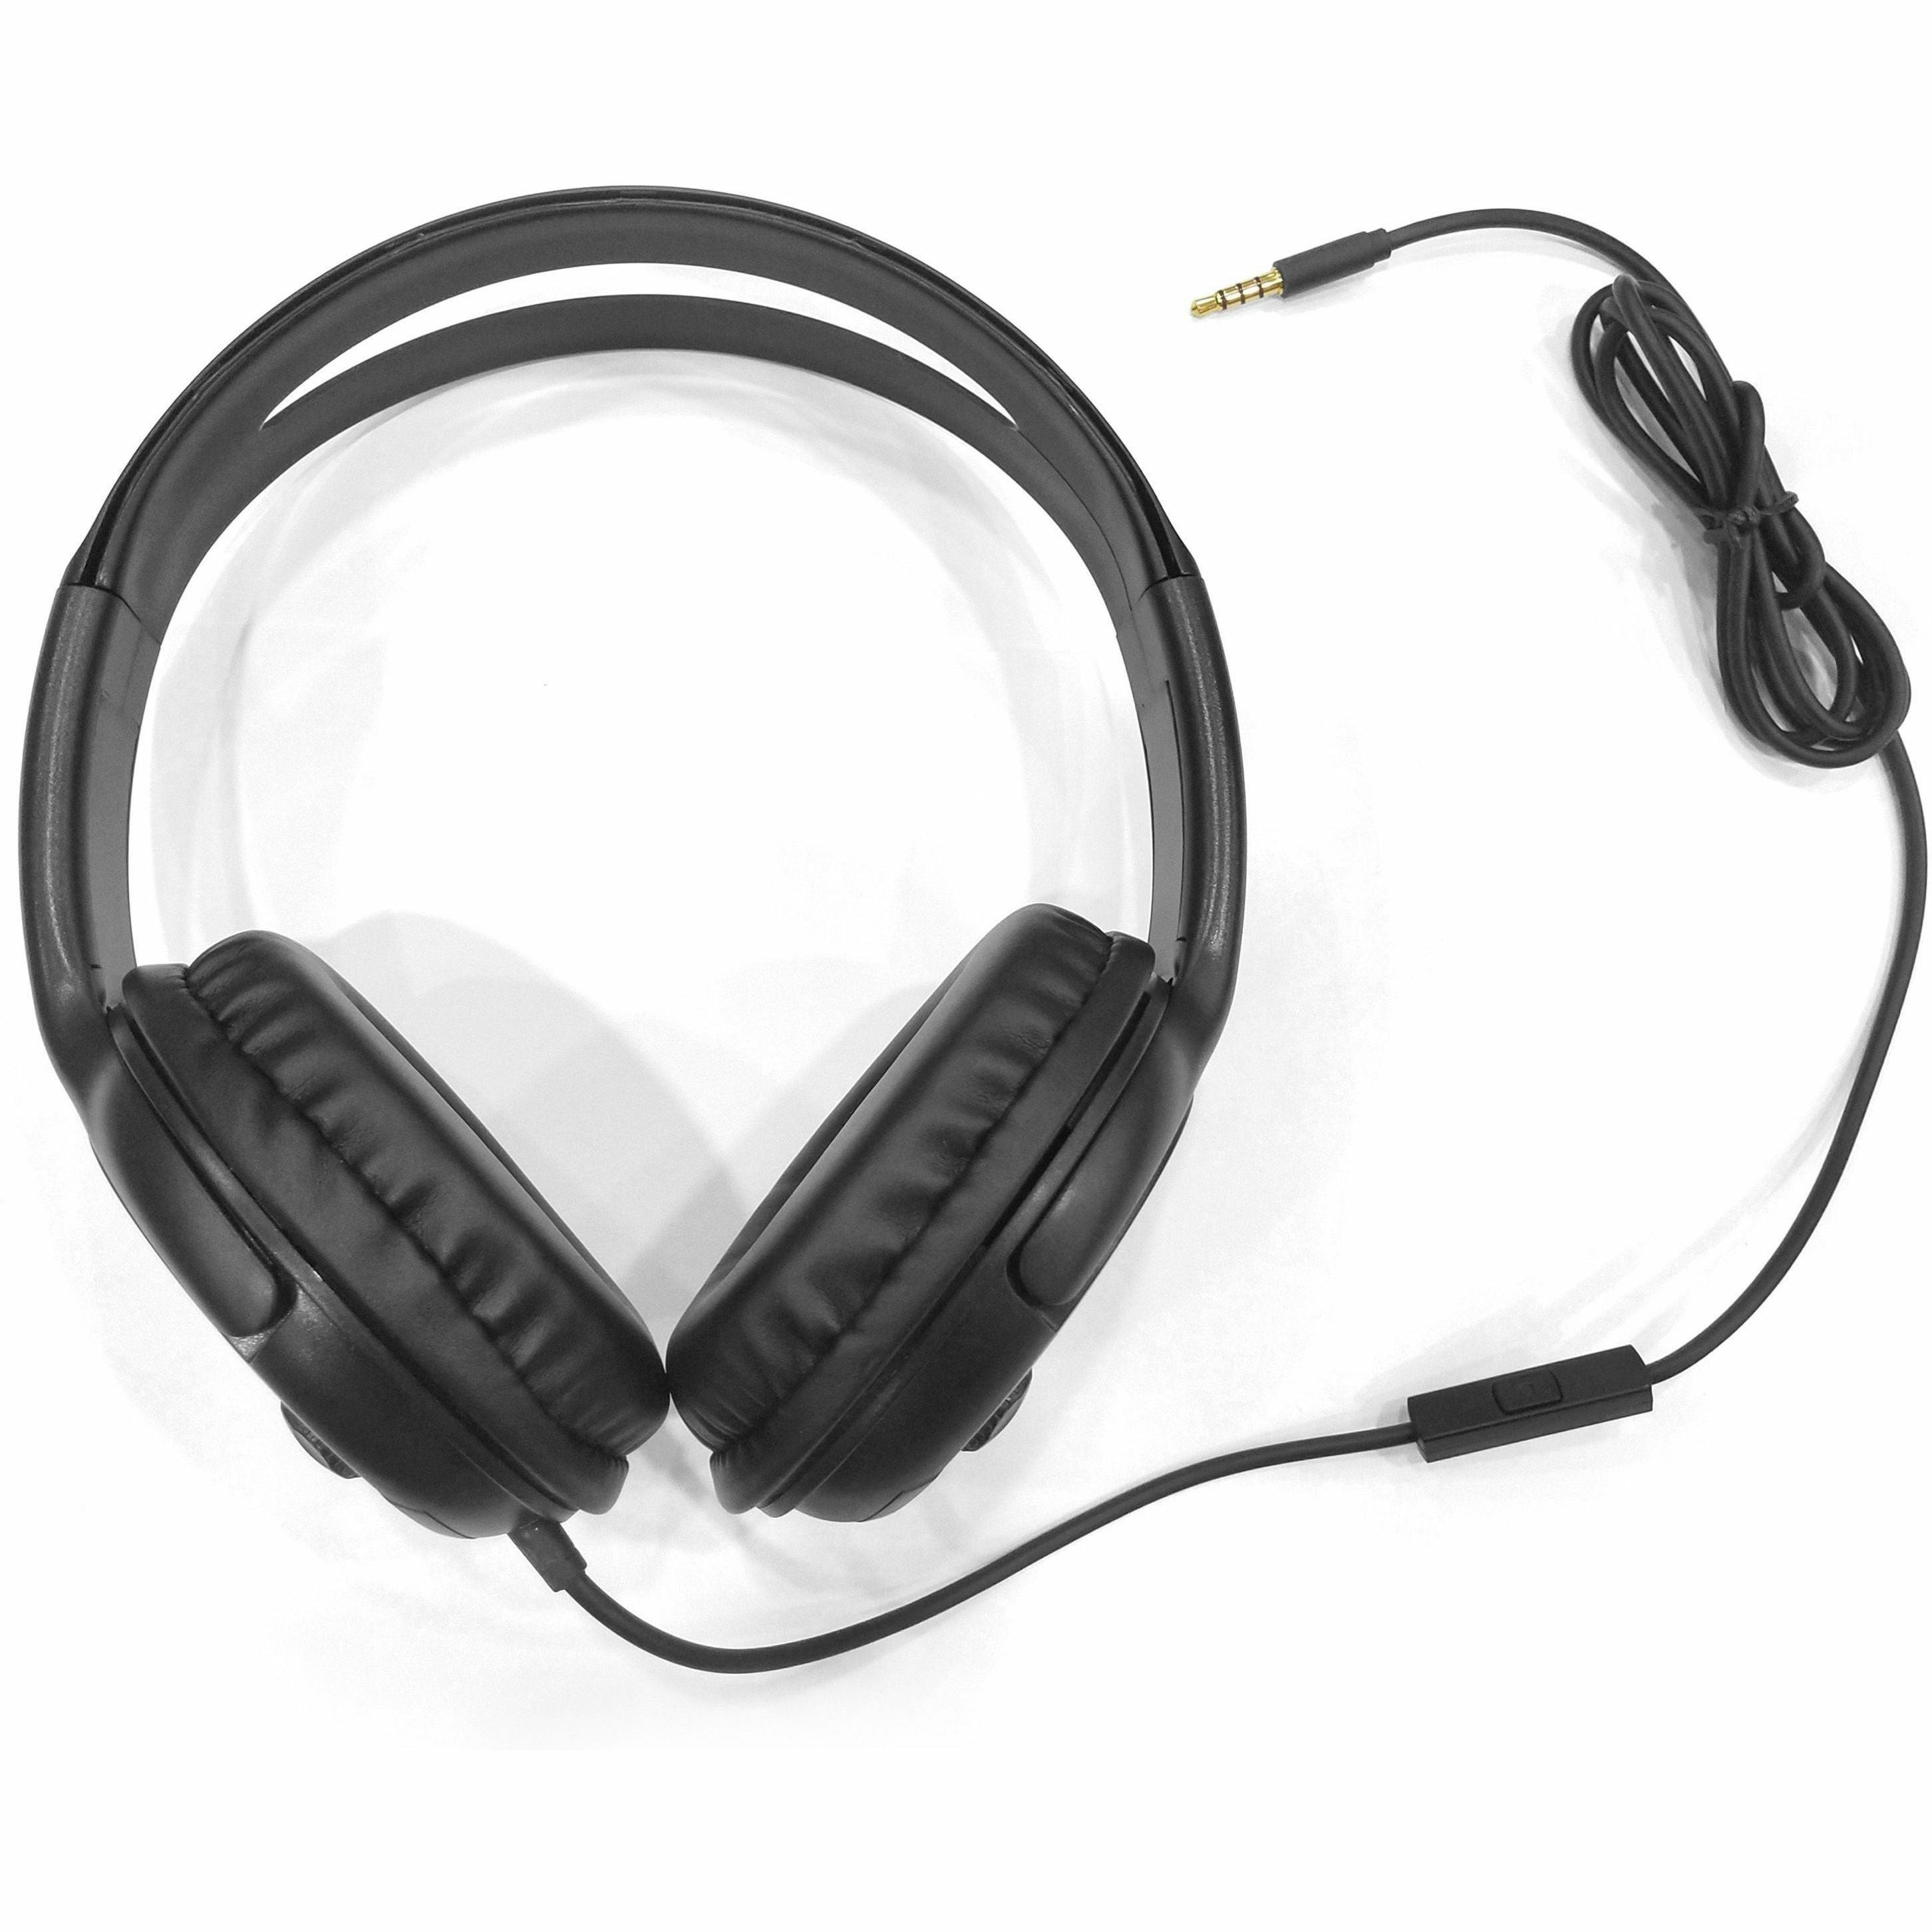 Compucessory Stereo Headset with Built-in Microphone - Stereo - Black - Mini-phone (3.5mm) - Wired - 32 Ohm - 20 Hz 20 kHz - Over-the-head - Binaural - Circumaural - 3.93 ft Cable - 1 - 